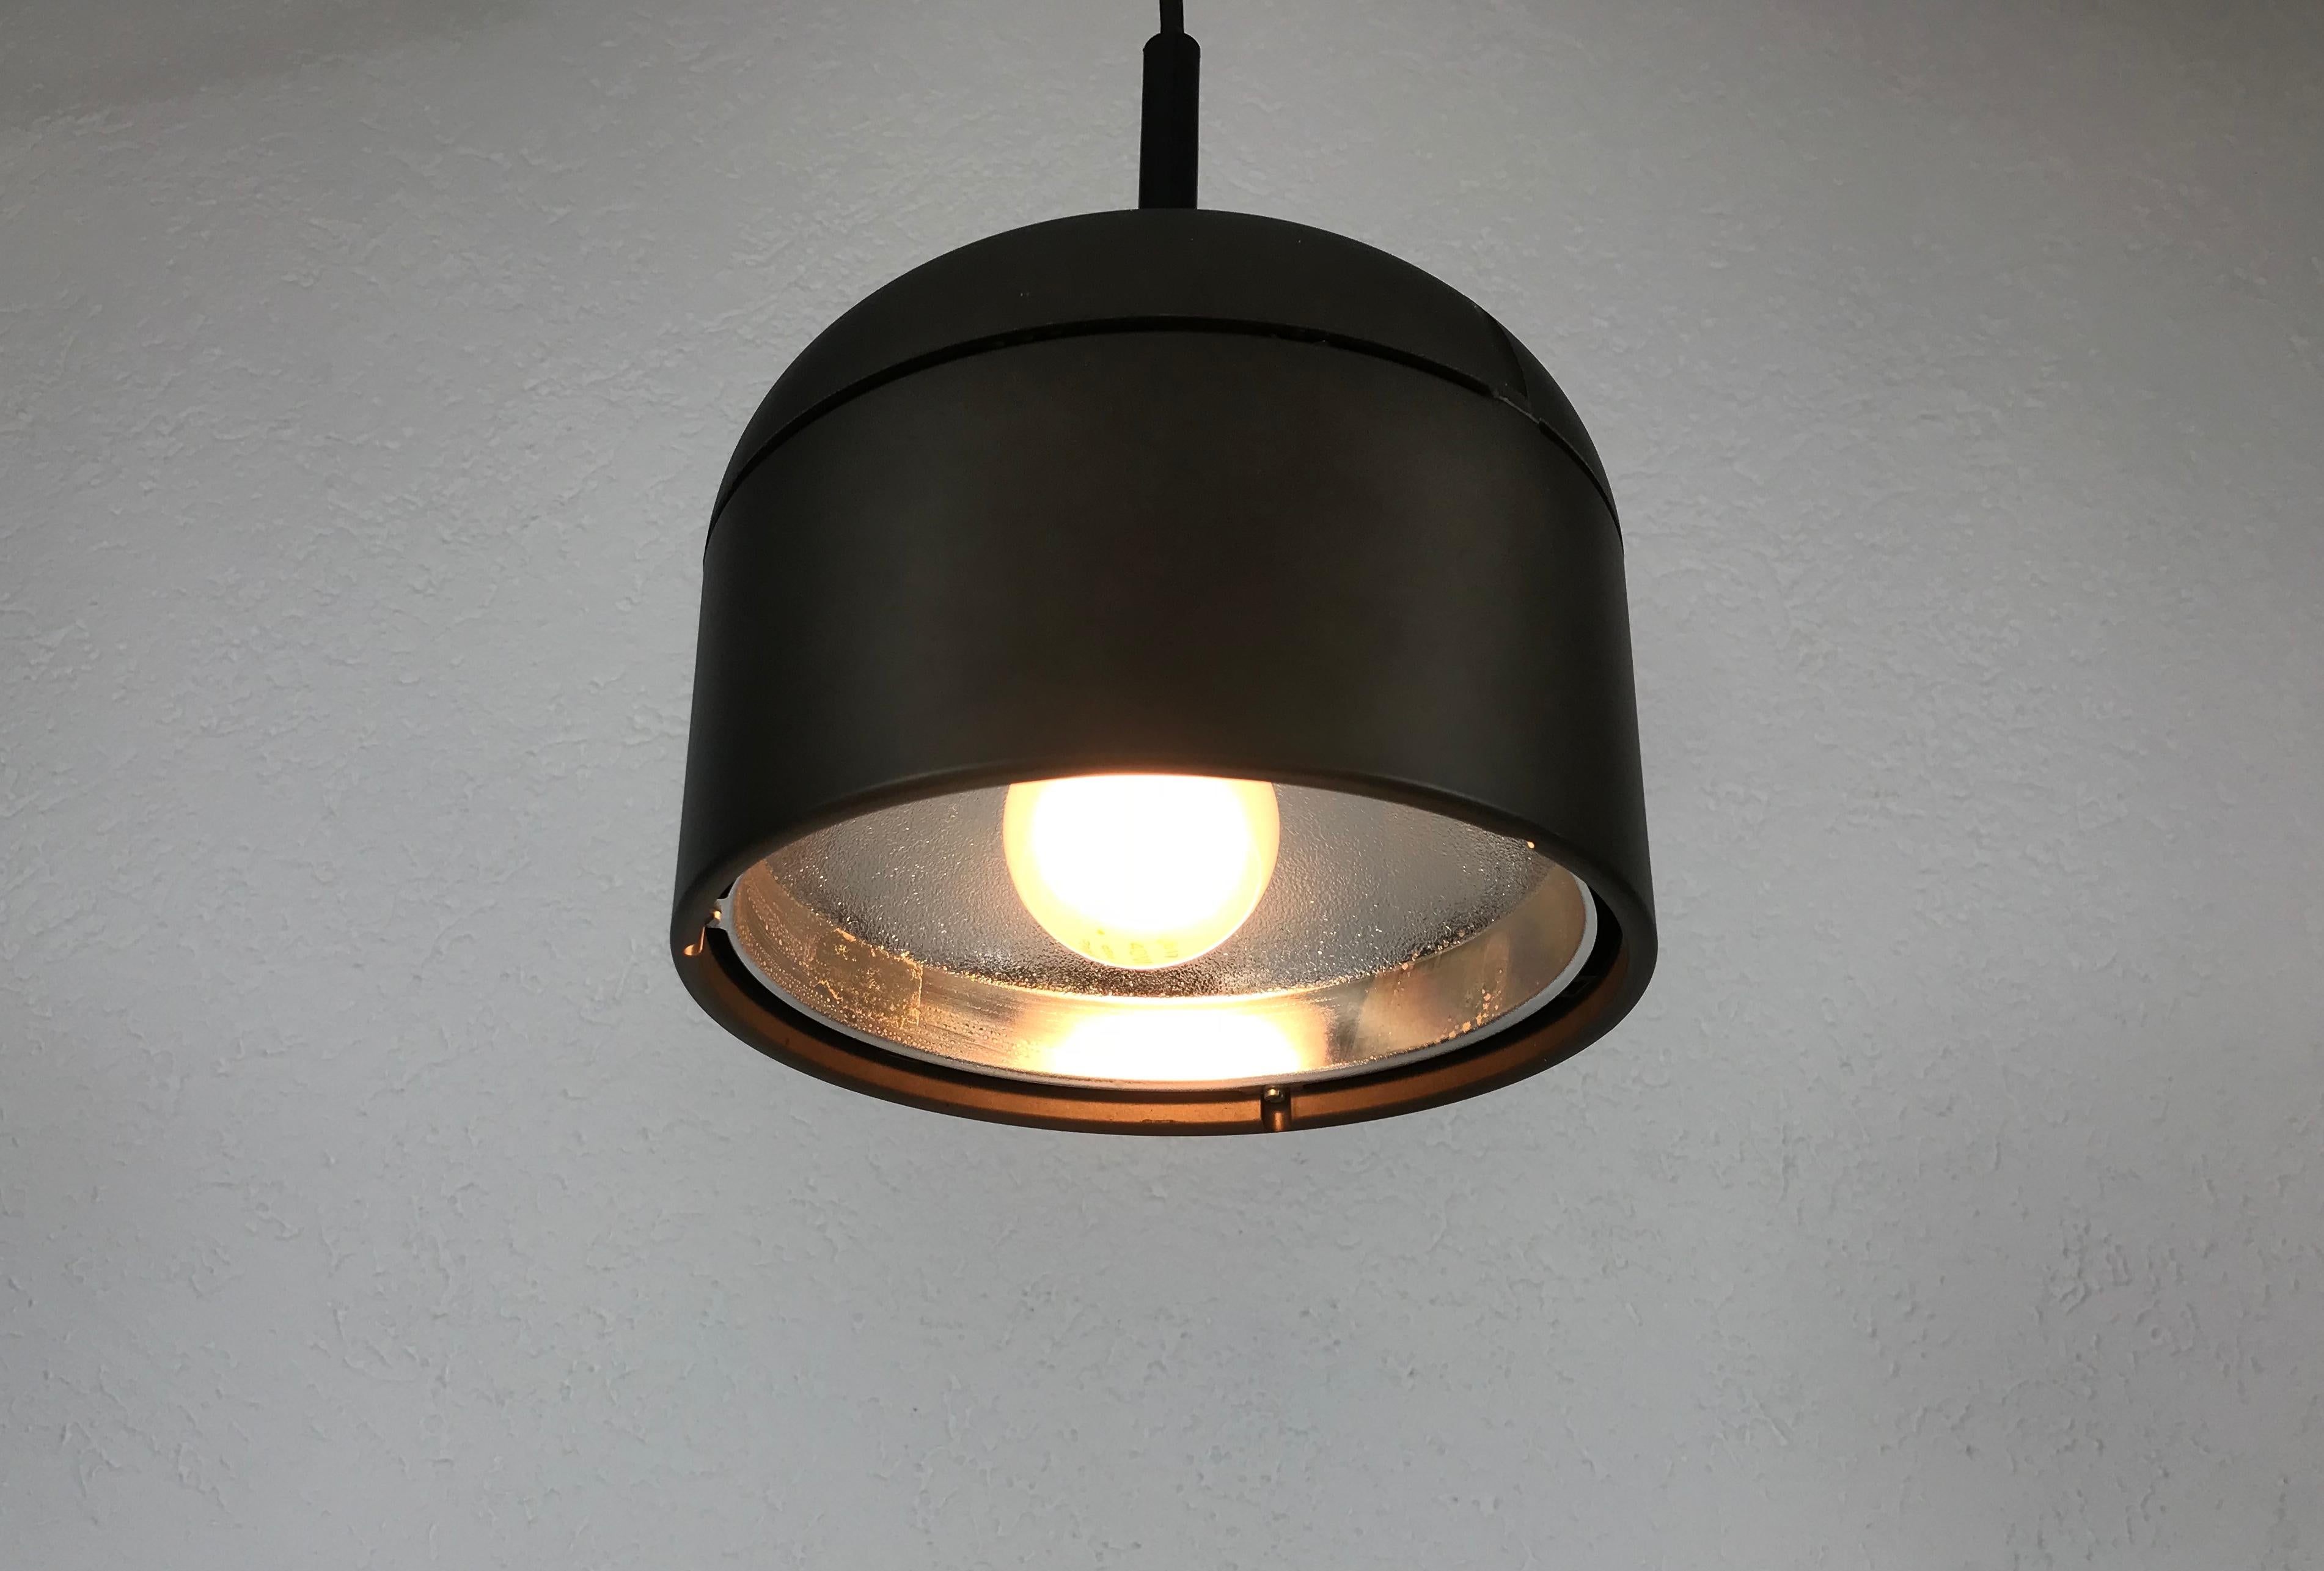 Staff brown hanging lamp made in Germany in the 1970s. The brown lamp shade is made of aluminium. 

The light requires one E27 light bulb.

The height is adjustable up to 150 cm.